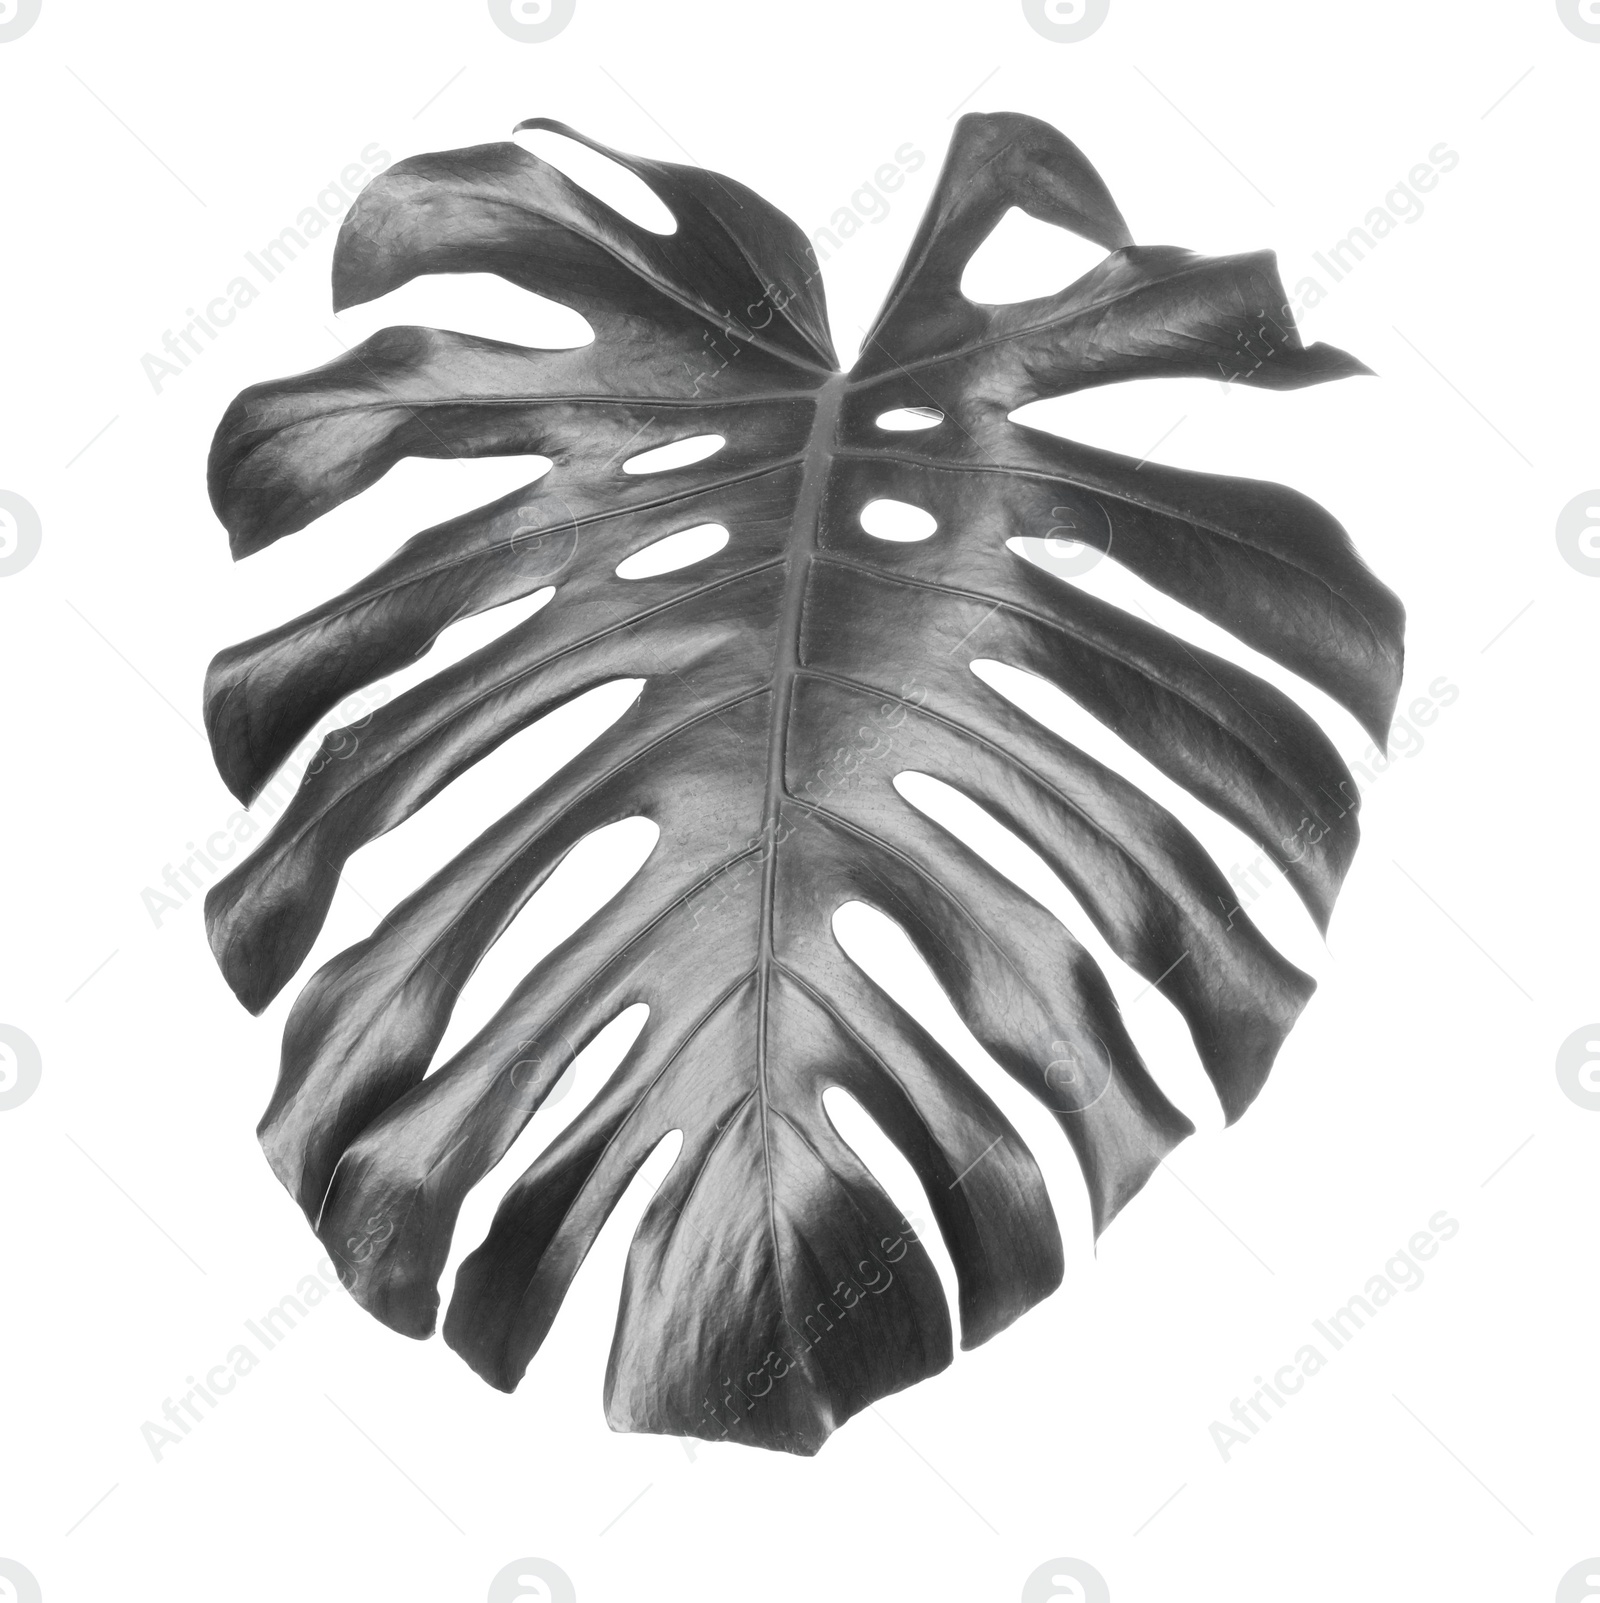 Image of Tropical monstera leaf on light background. Black and white tone